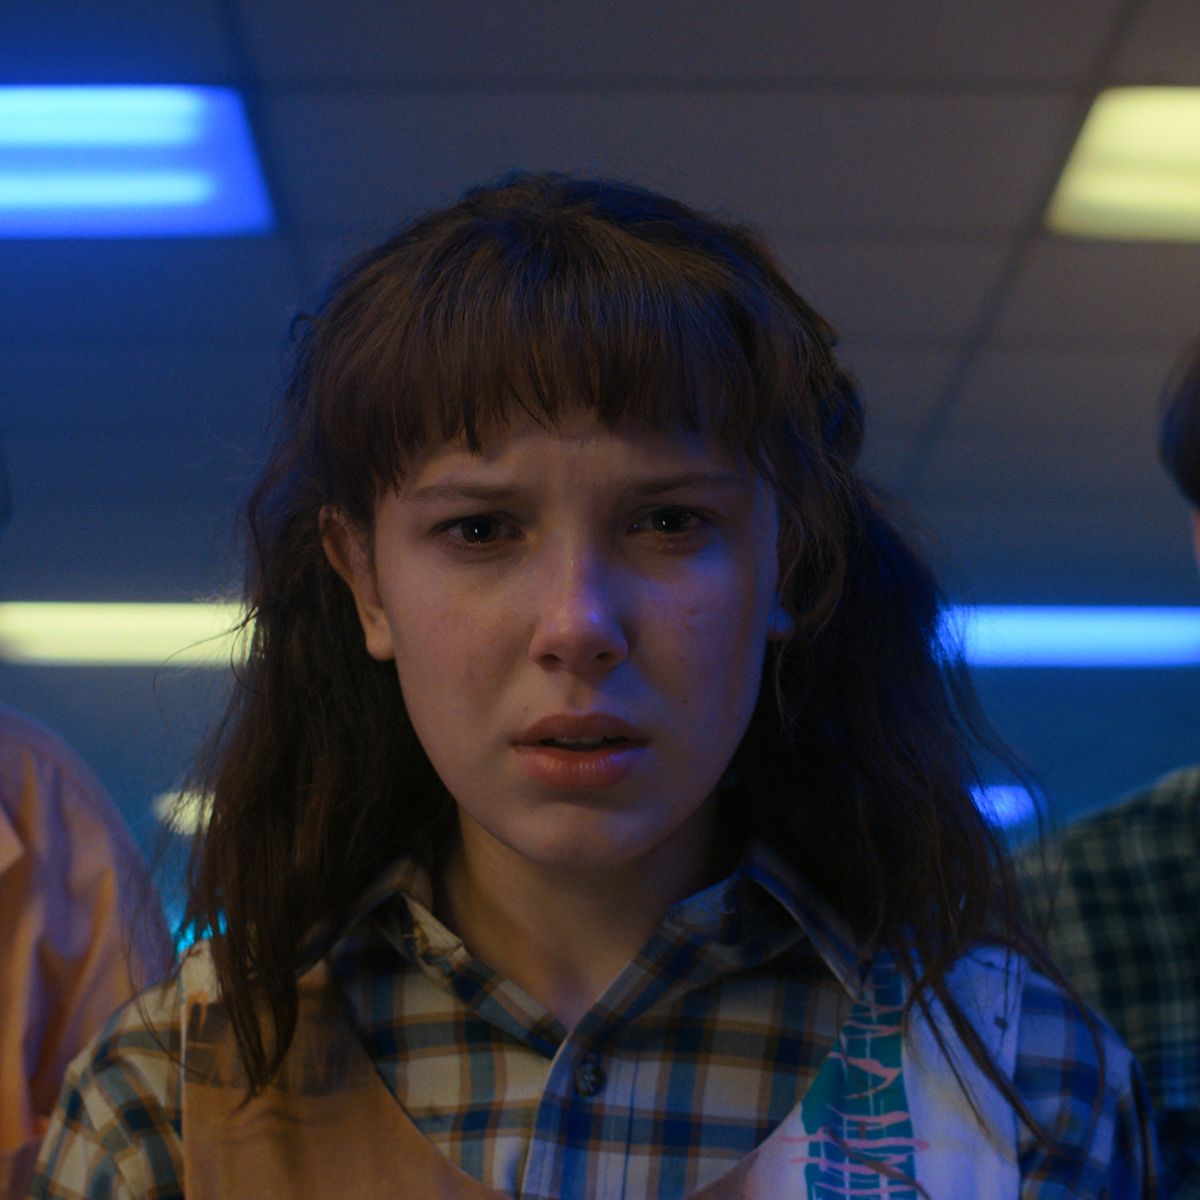 Will Eddie Munson return in the next season? Here's what 'Stranger Things'  producer Shawn Levy says - Entertainment